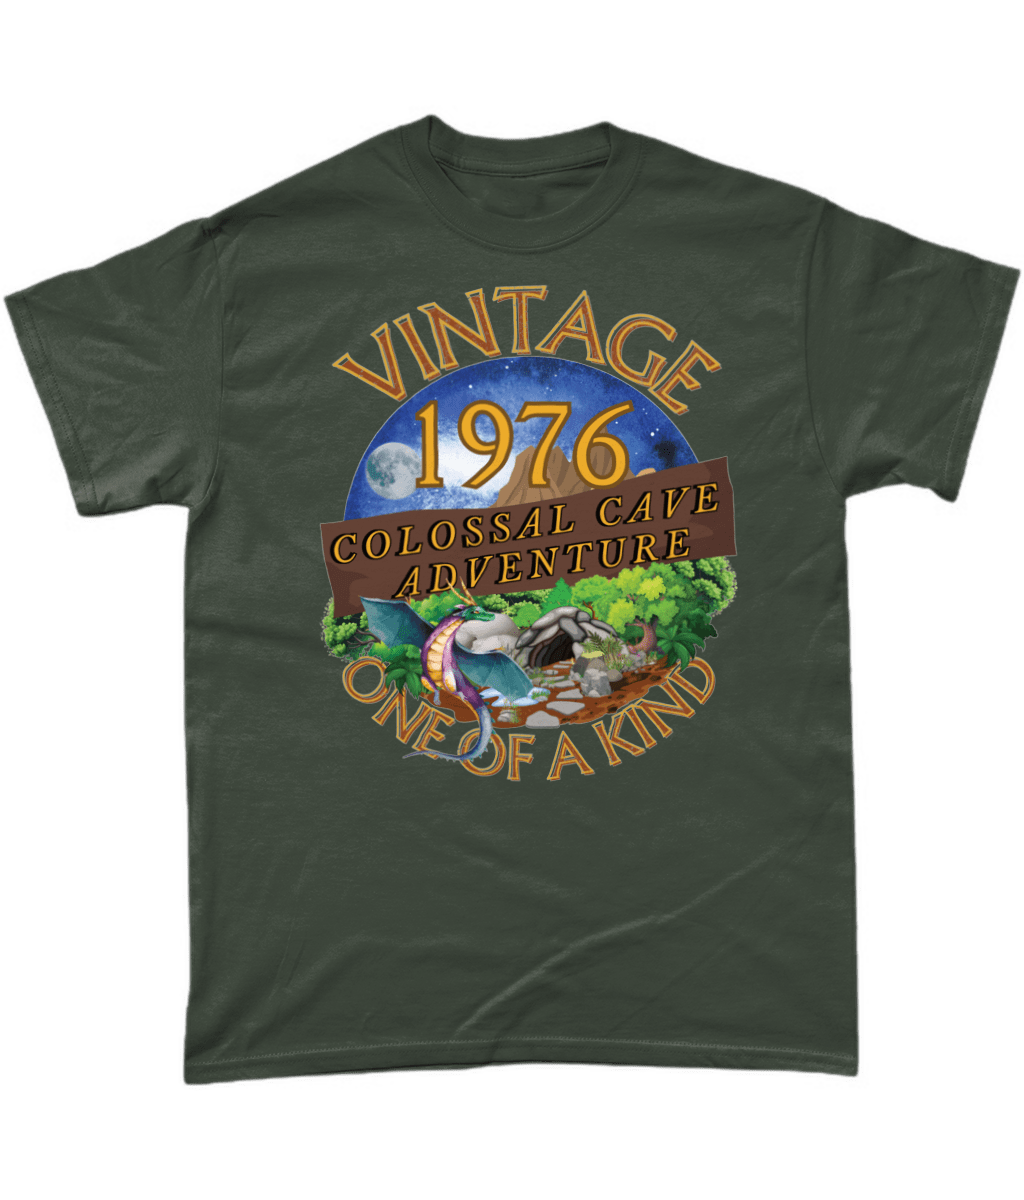 Green T-Shirt with words vintage,1976,colossal cave adventure,one of a kind,circular picture of a dragon,cave and woodland,night sky